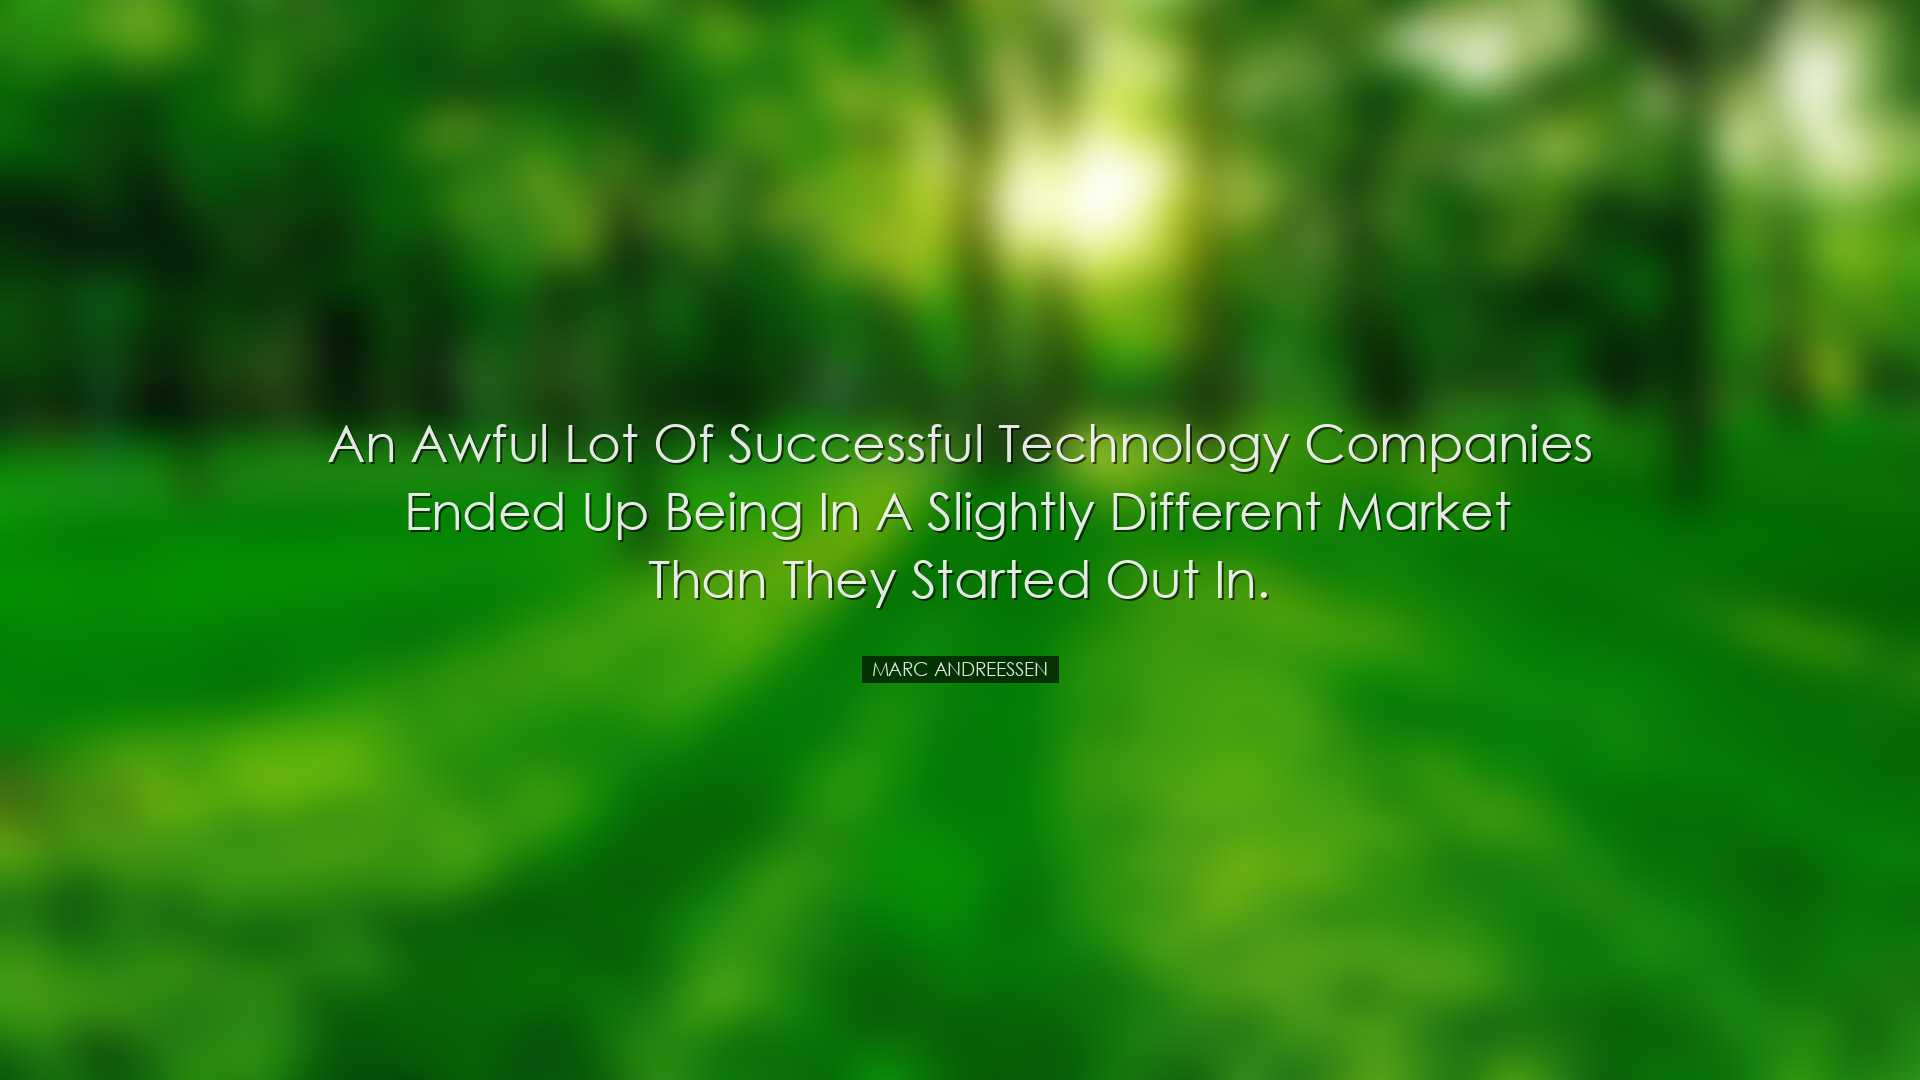 An awful lot of successful technology companies ended up being in